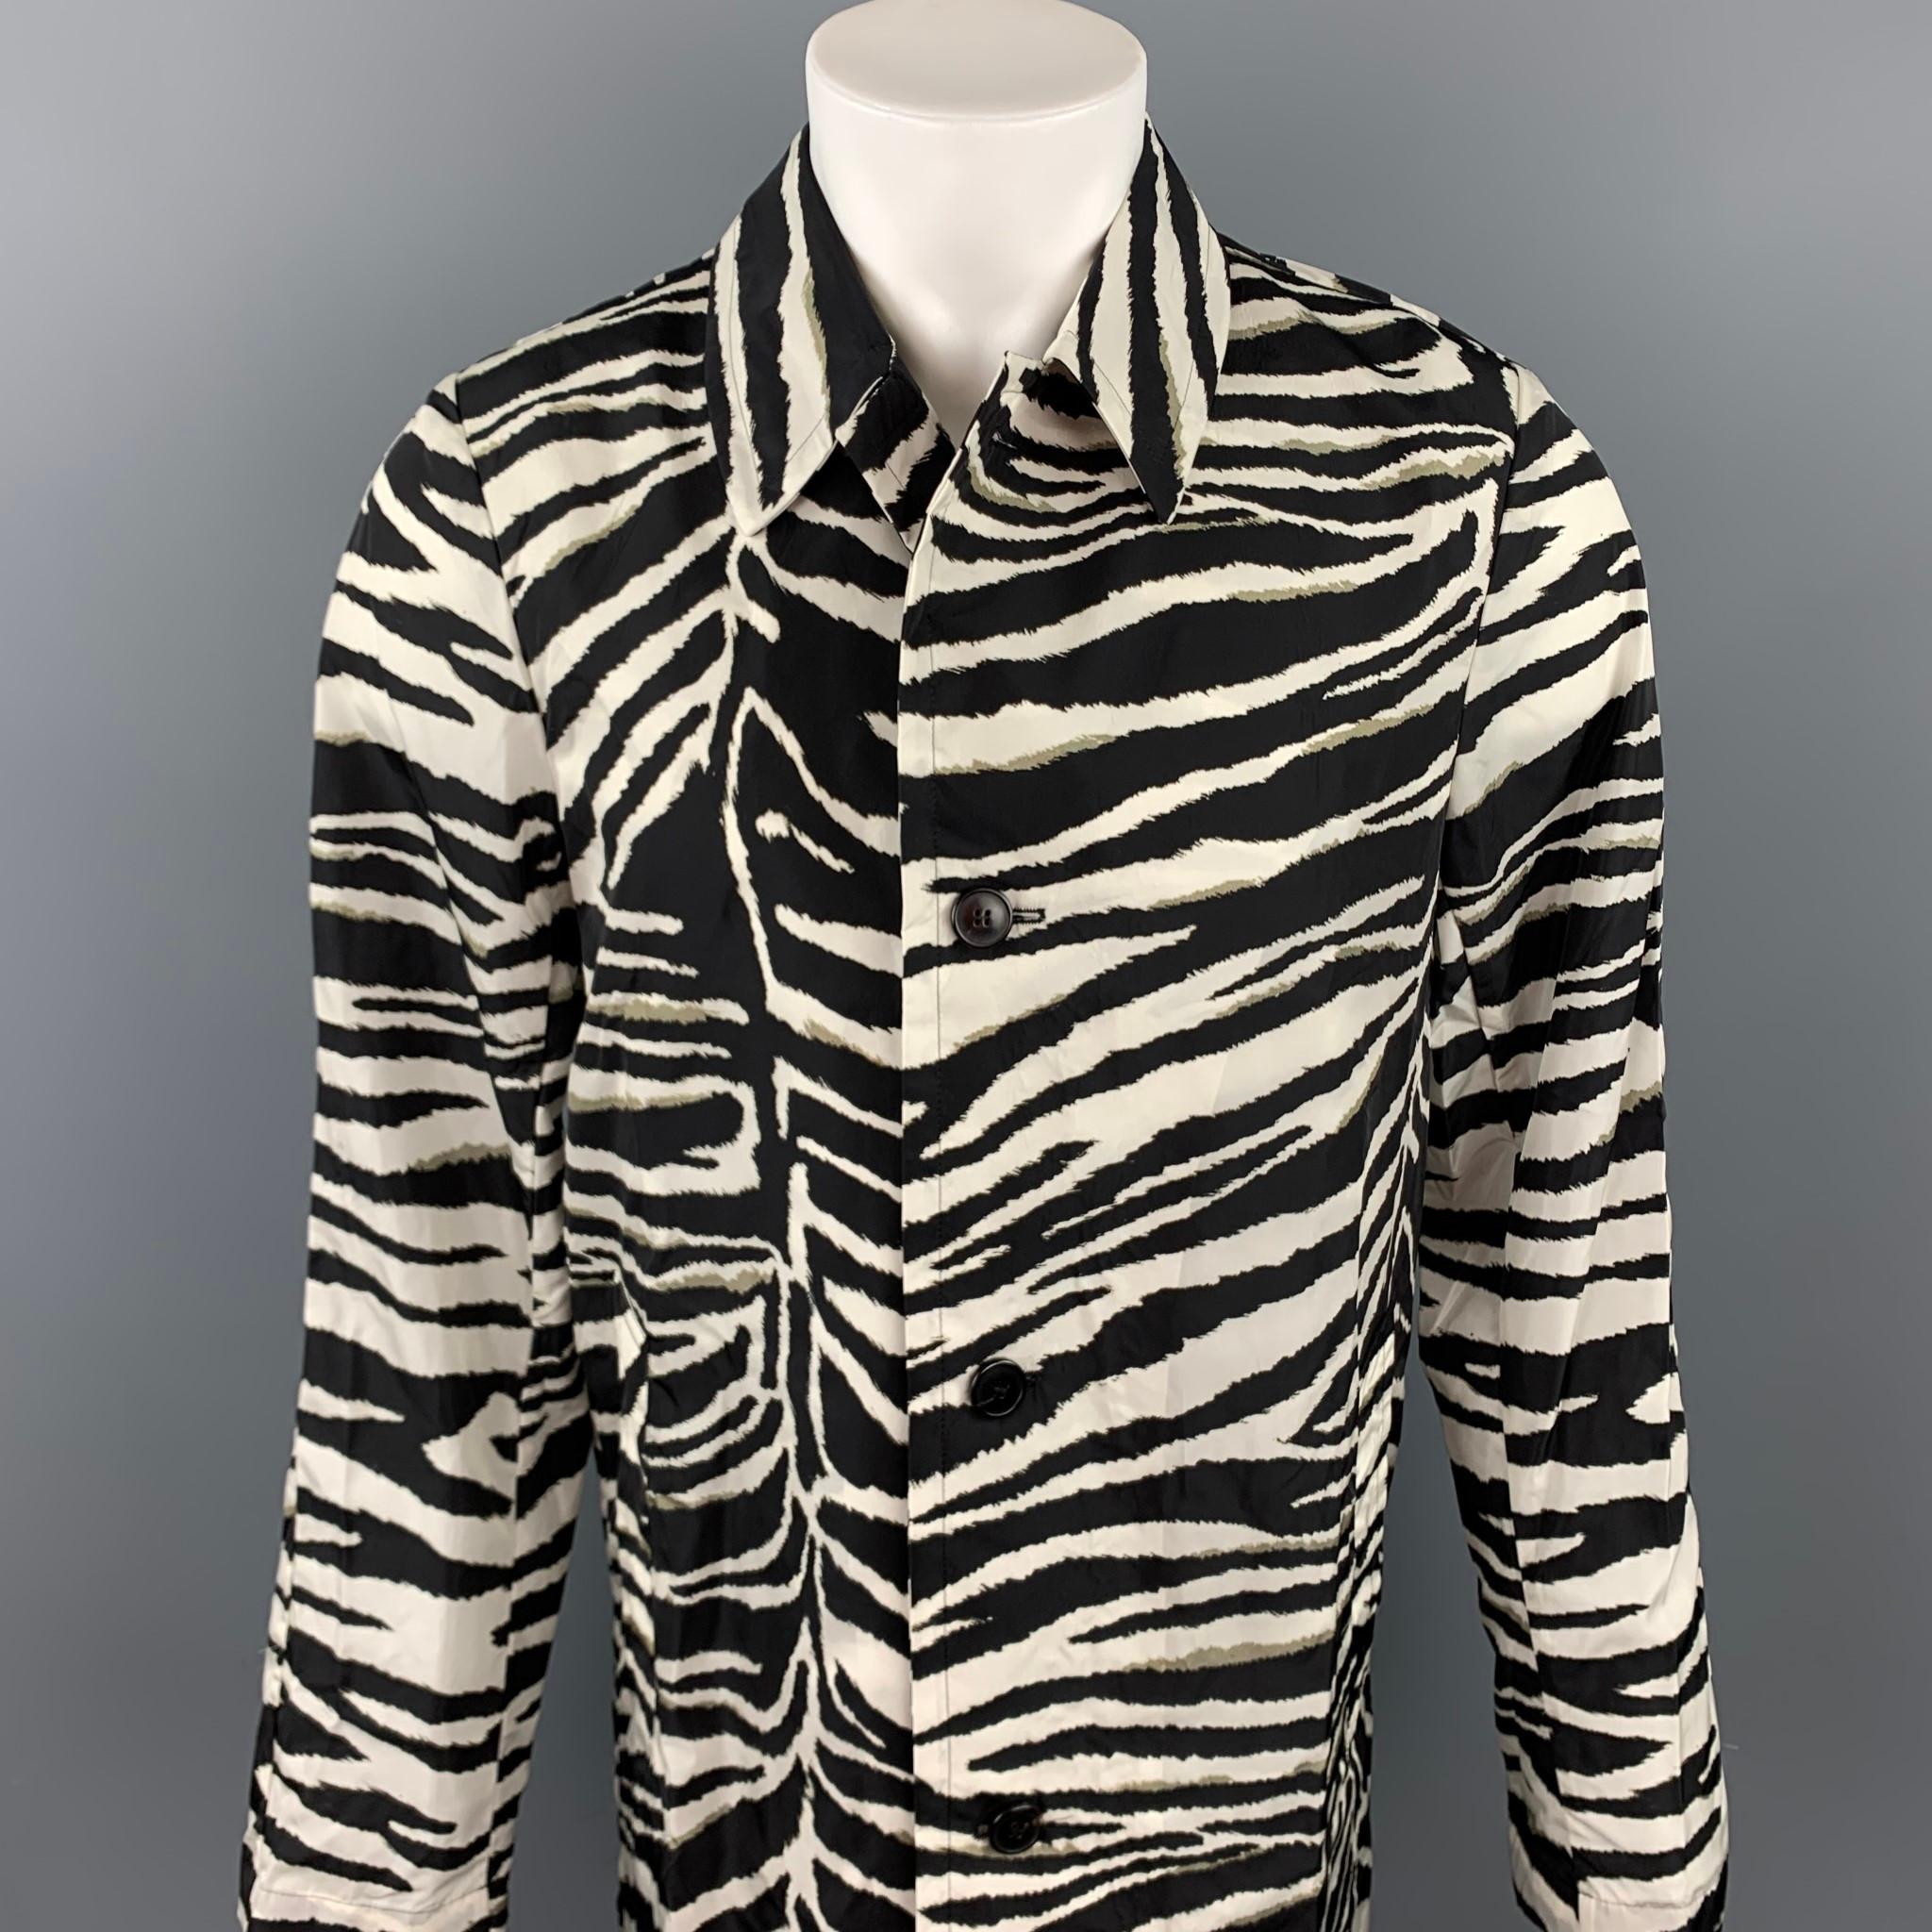 DRIES VAN NOTEN raincoat comes in a black & white zebra print polyamide featuring a spread collar, slit pockets, and a buttoned closure.

Brand New. 
Marked: 44
Original Retail Price: $1,275.00

Measurements:

Shoulder: 17 in.
Chest: 38 in.
Sleeve: